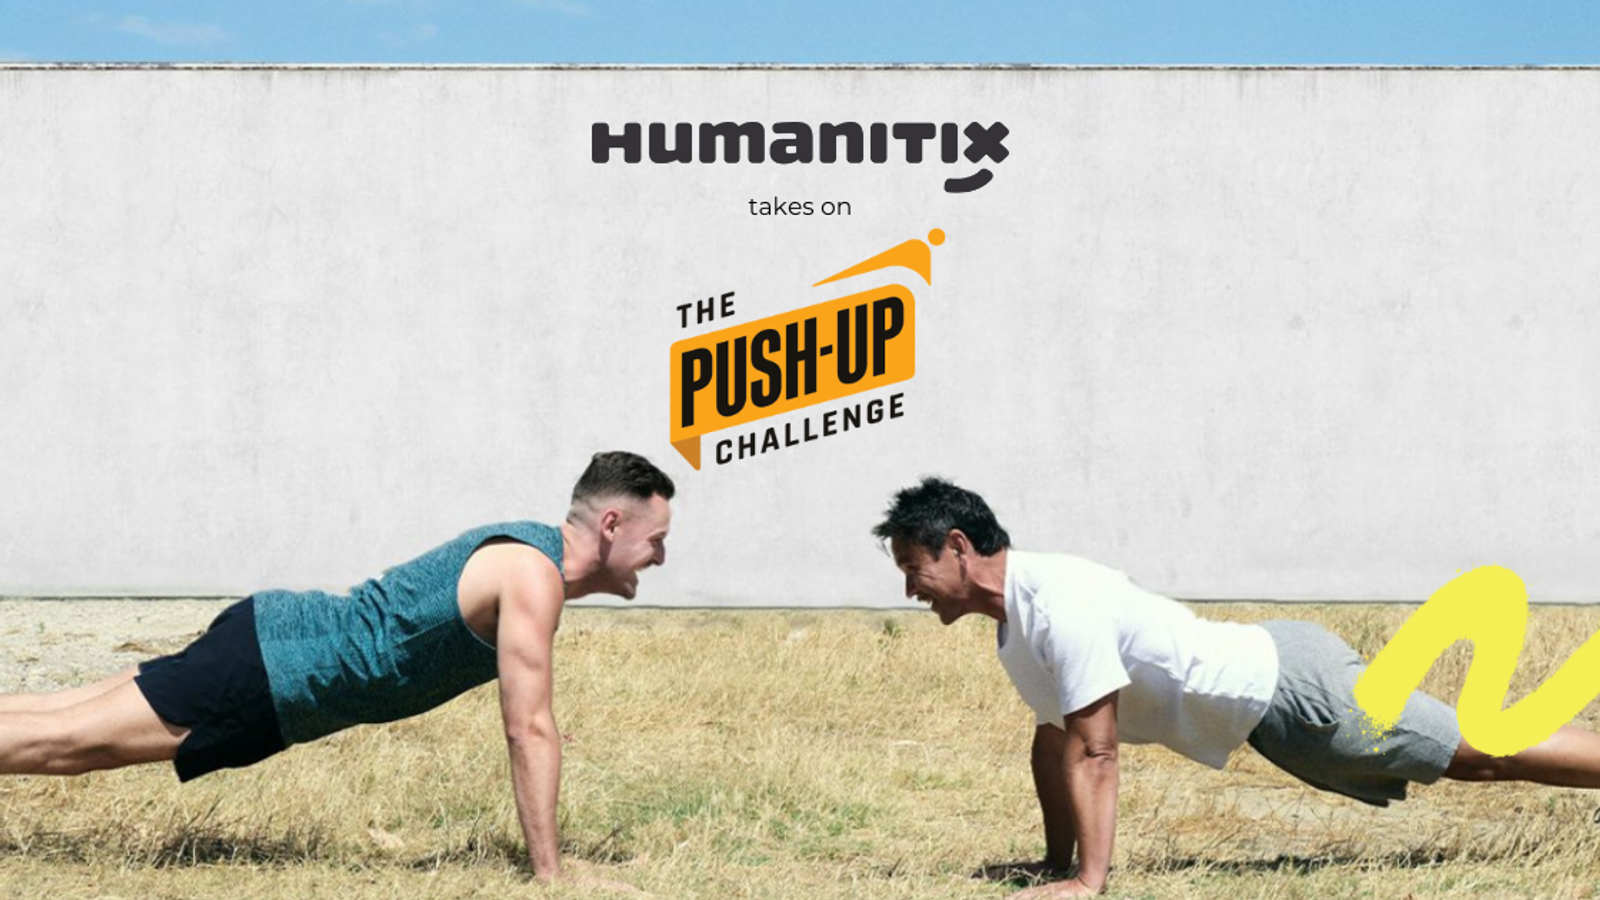 Why Humanitix completed 31,972 push-ups in June